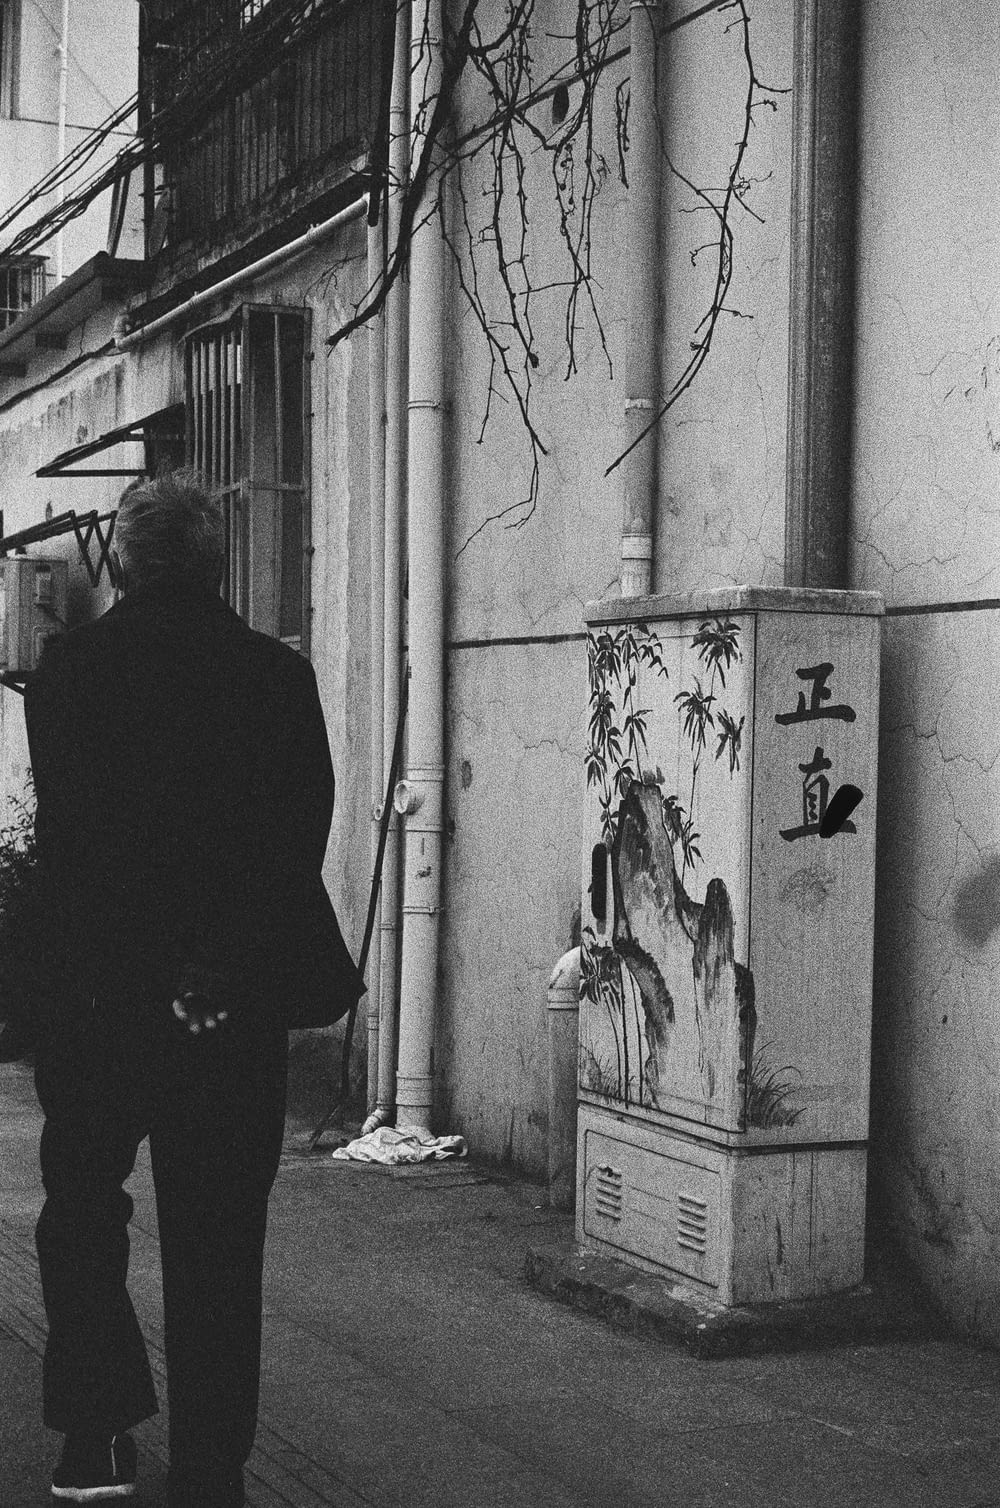 a man standing next to a wall with graffiti on it